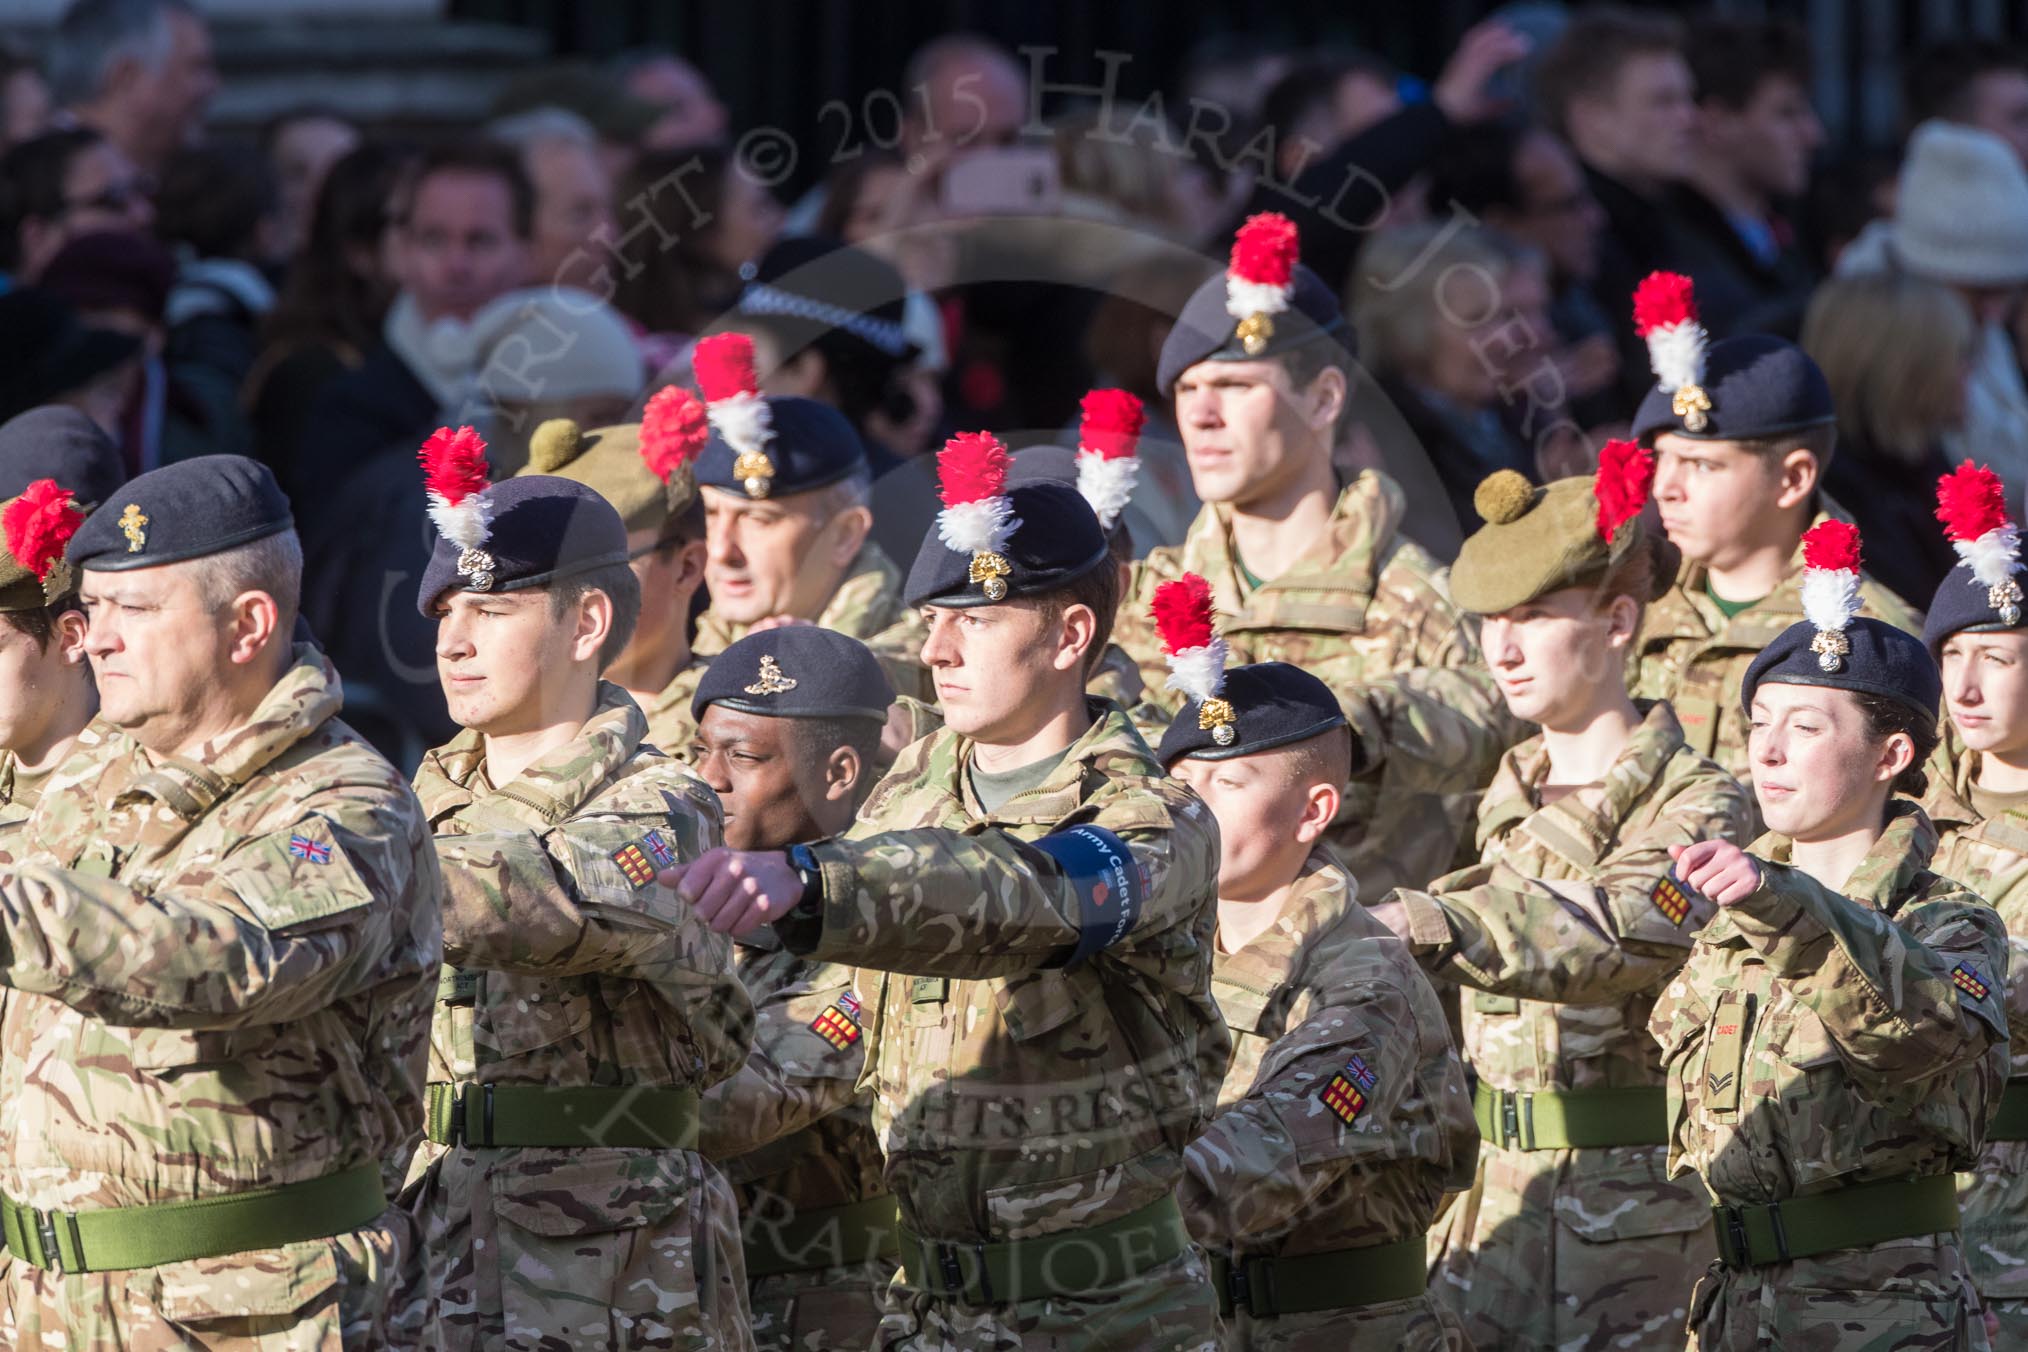 March Past, Remembrance Sunday at the Cenotaph 2016: M32 Army and combined Cadet Force.
Cenotaph, Whitehall, London SW1,
London,
Greater London,
United Kingdom,
on 13 November 2016 at 13:18, image #2823